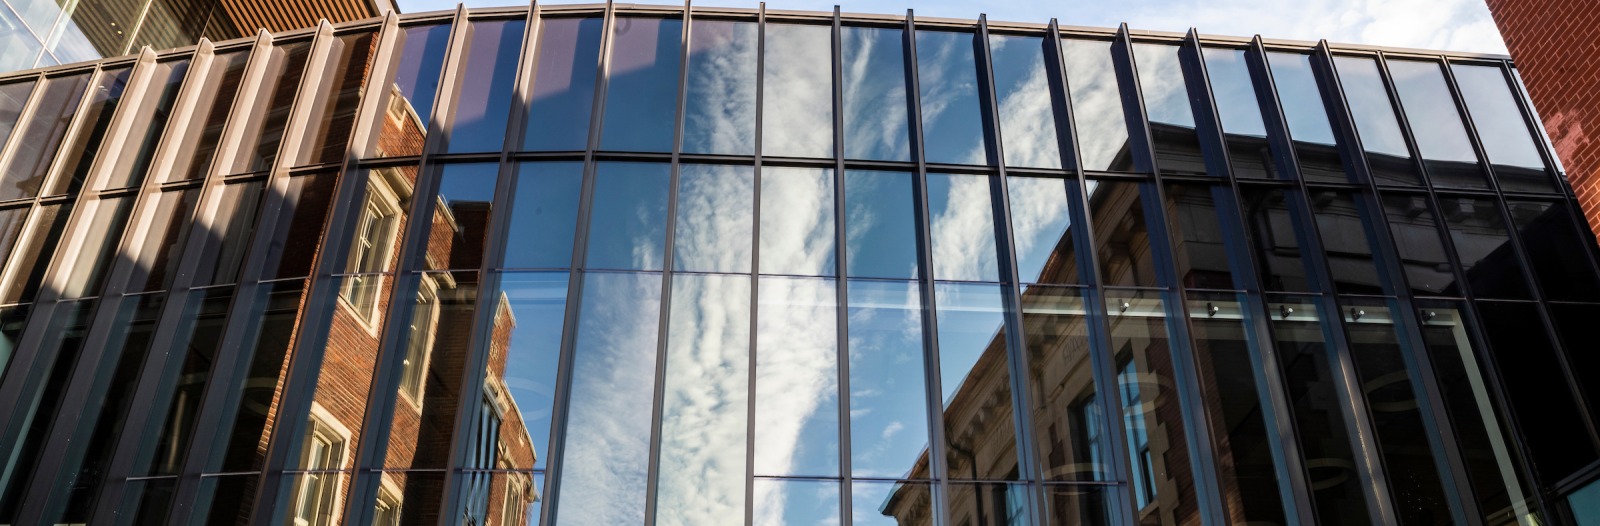 metal and glass building with the reflection of blue sky with clouds and brick and stone buildings